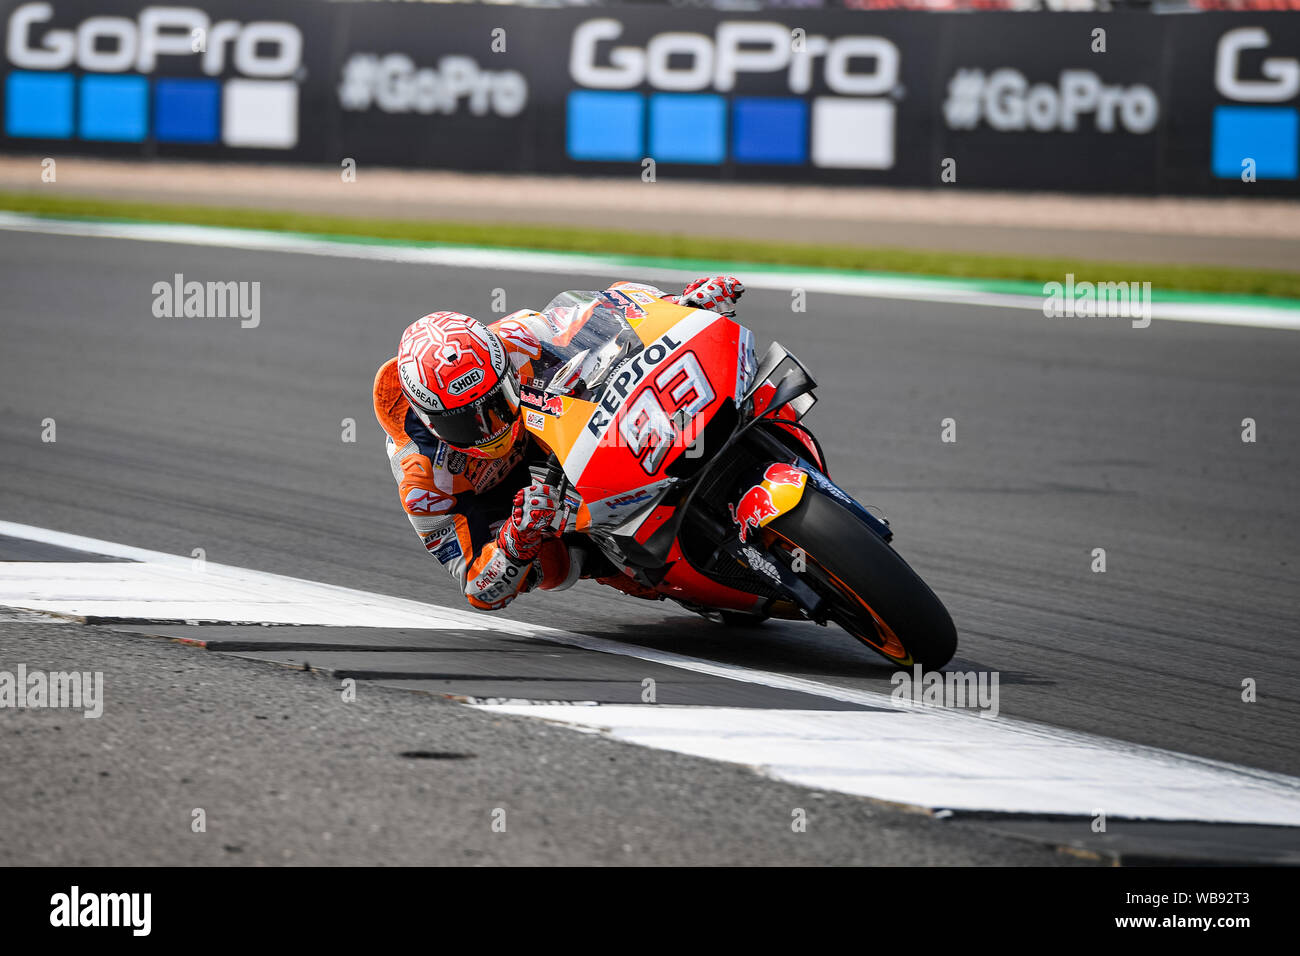 Towcester, UK. 25th Aug, 2019.  25th Aug, 2019. Marc Marquez (SPA) of Repsol Honda Team during Sunday’s Race of  GoPro British Grand Prix at Silverstone Circuit on Sunday, August 25, 2019 in TOWCESTER, ENGLAND. Credit: Taka G Wu/Alamy Live News Stock Photo